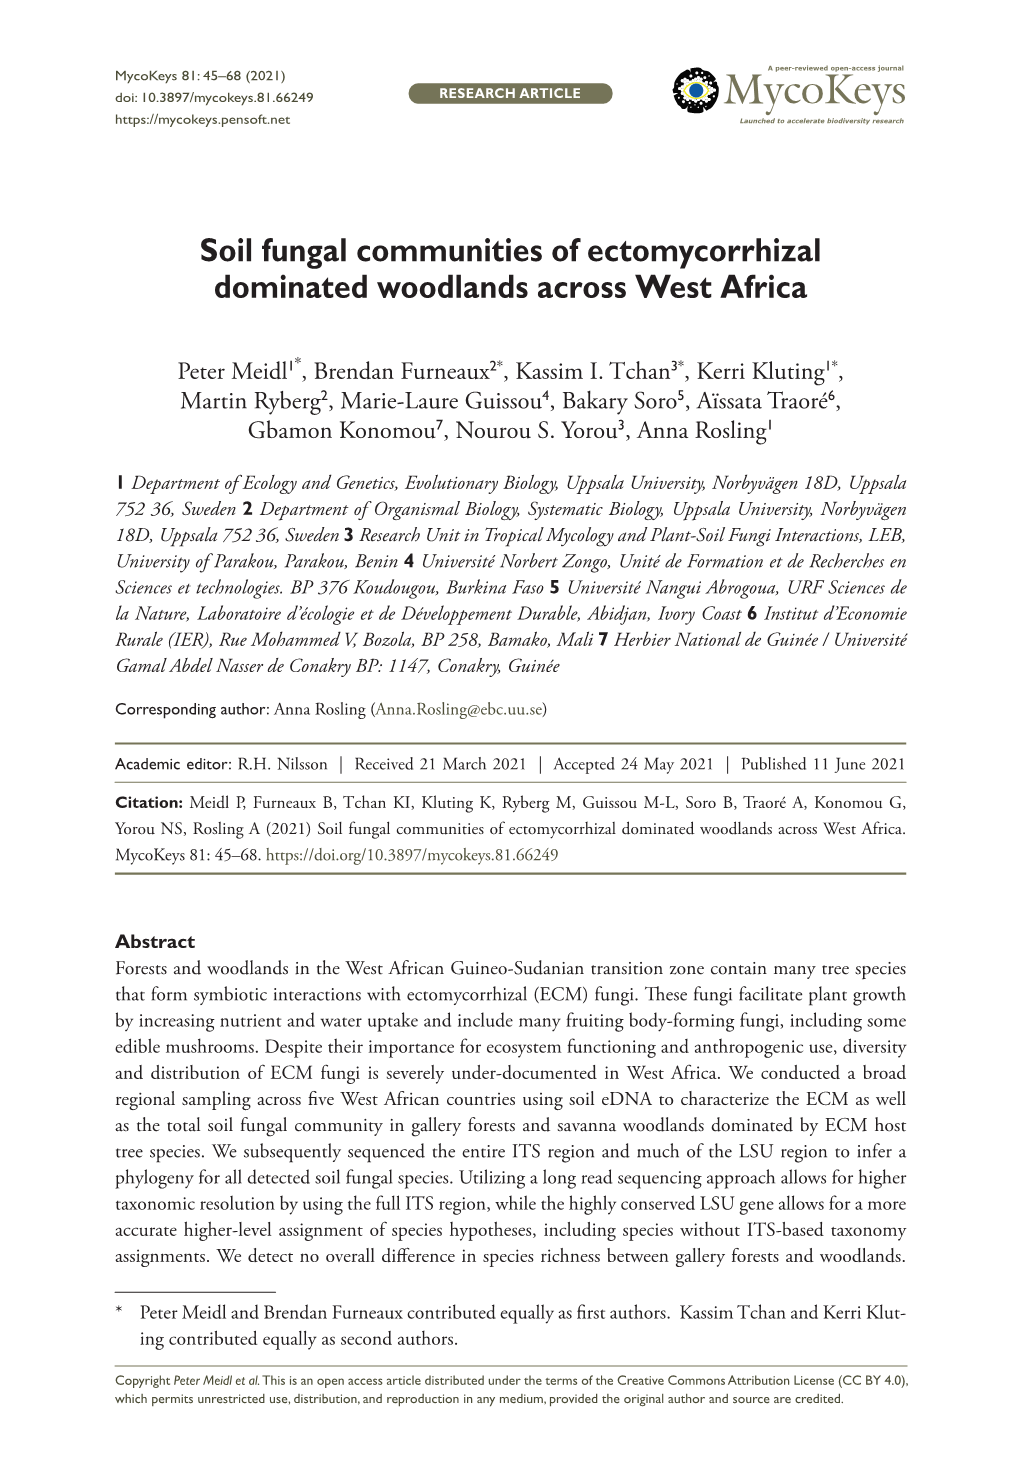 Soil Fungal Communities of Ectomycorrhizal Dominated Woodlands Across West Africa